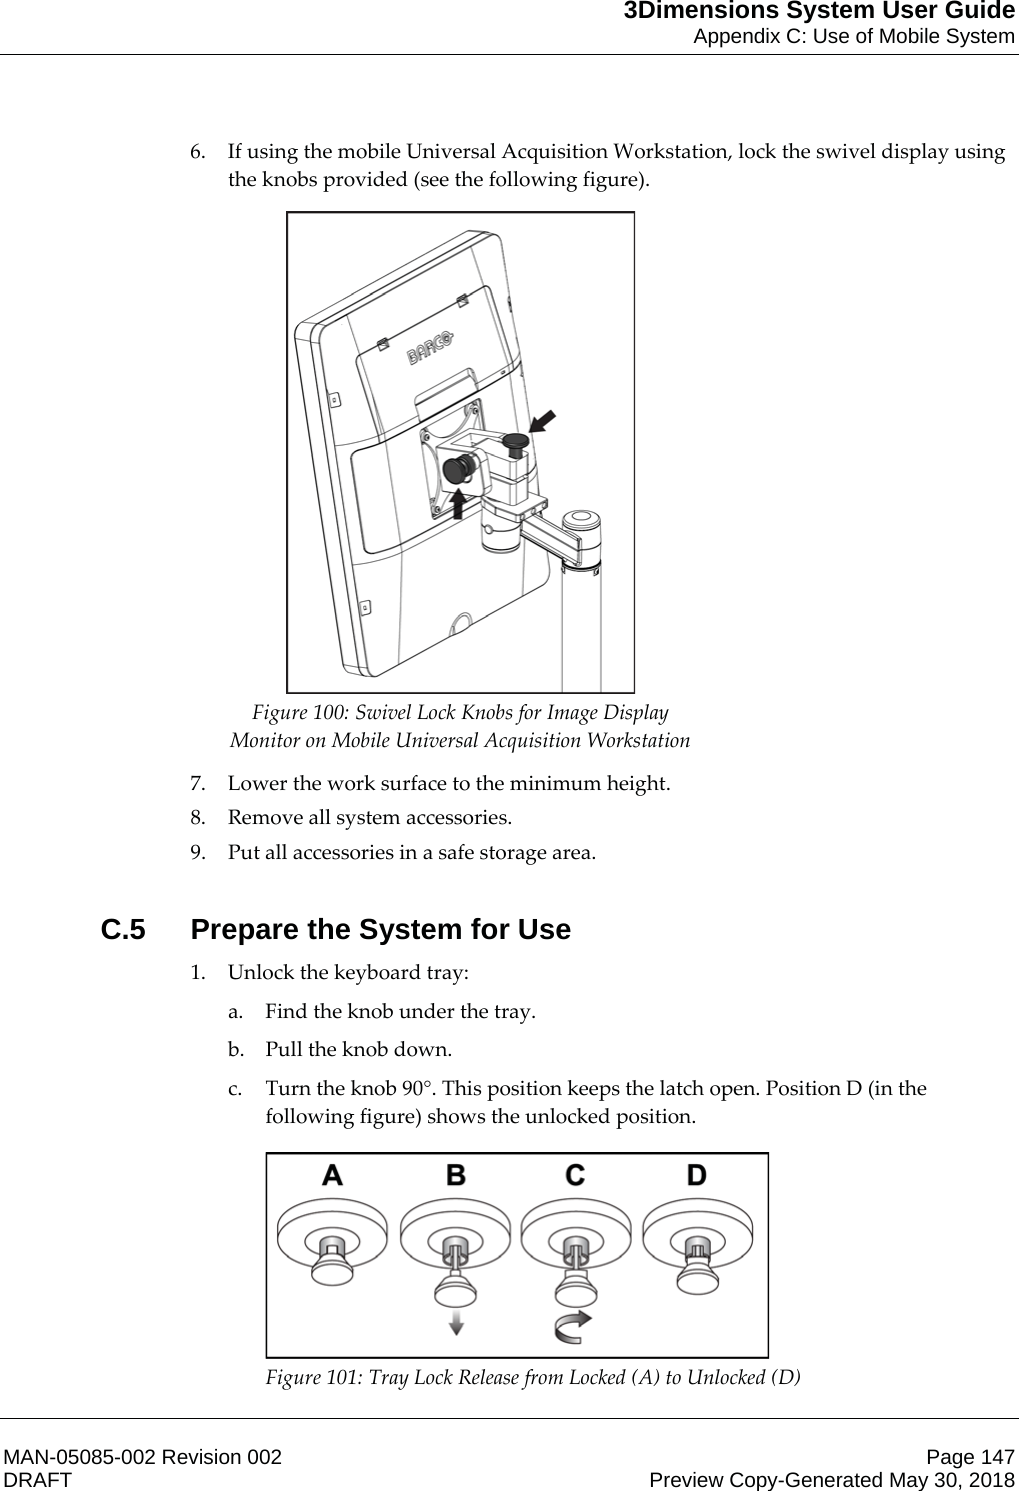 3Dimensions System User GuideAppendix C: Use of Mobile SystemMAN-05085-002 Revision 002 Page 147DRAFT Preview Copy-Generated May 30, 20186. If using the mobile Universal Acquisition Workstation, lock the swivel display using the knobs provided (see the following figure).  Figure 100: Swivel Lock Knobs for Image Display Monitor on Mobile Universal Acquisition Workstation  7. Lower the work surface to the minimum height. 8. Remove all system accessories. 9. Put all accessories in a safe storage area.  C.5  Prepare the System for Use1. Unlock the keyboard tray: a. Find the knob under the tray. b. Pull the knob down. c. Turn the knob 90°. This position keeps the latch open. Position D (in the following figure) shows the unlocked position.  Figure 101: Tray Lock Release from Locked (A) to Unlocked (D)  